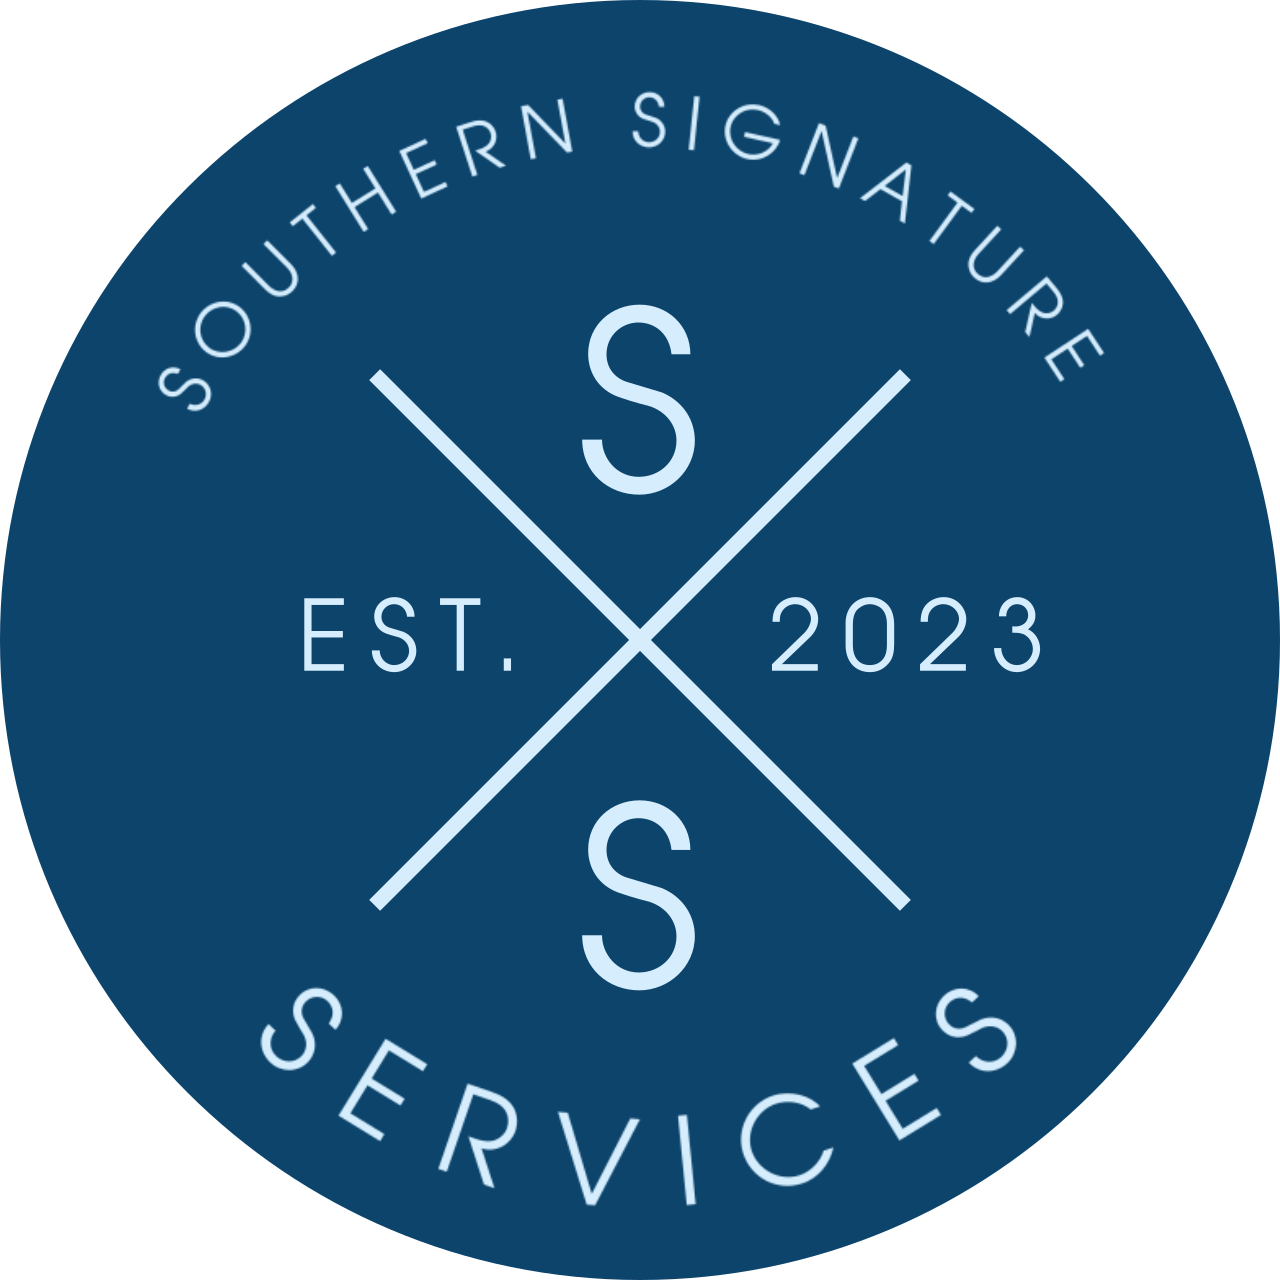 SOUTHERN SIGNATURE SERVICES, PLLC.'s web page